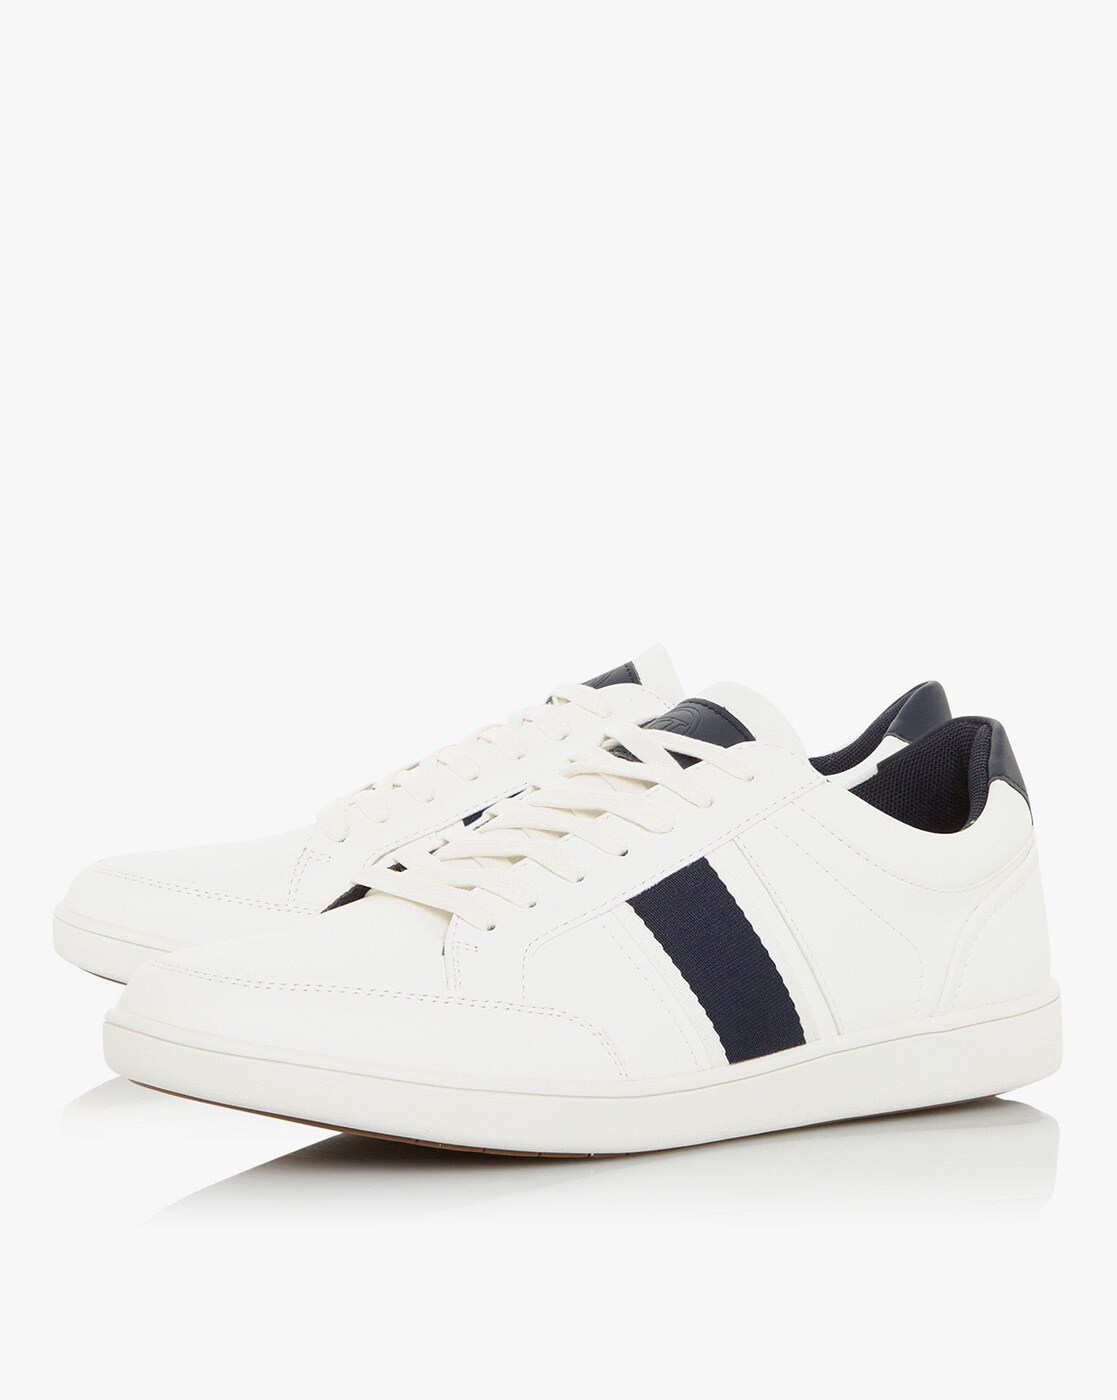 Sneakers for Men by Dune London 